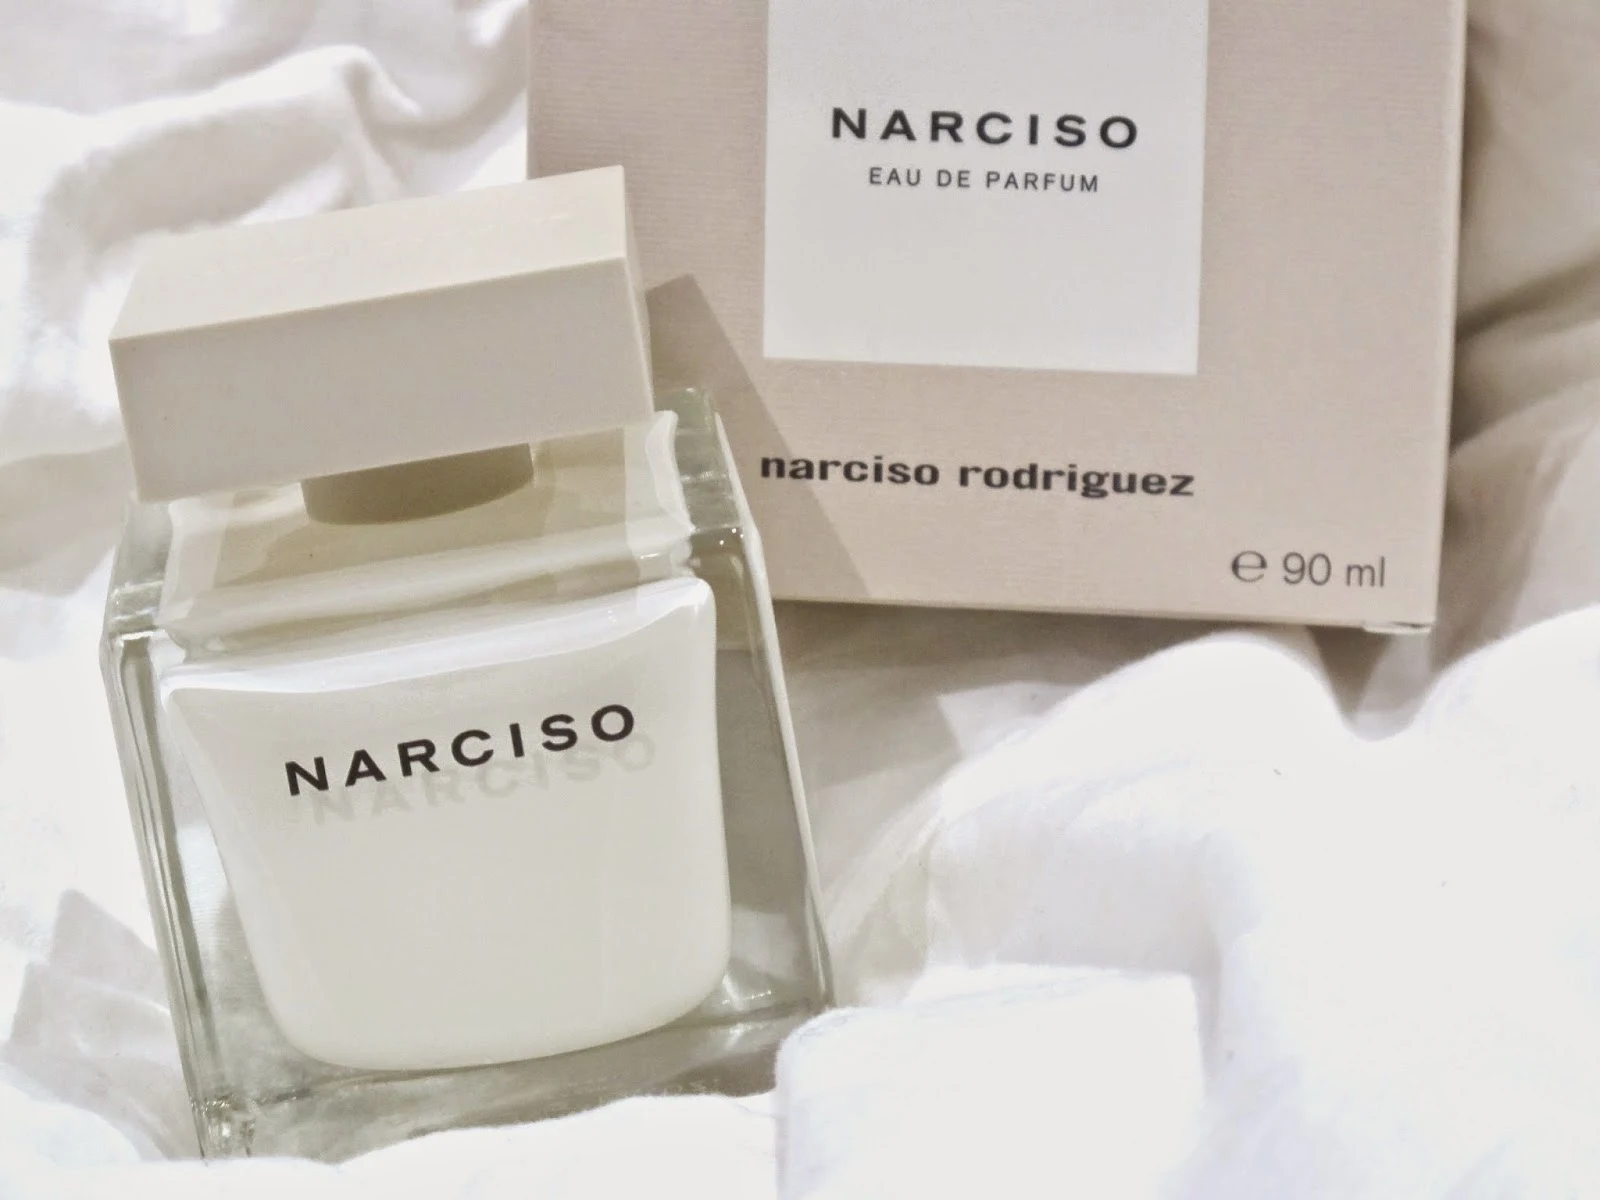 NARCISO fragrance by Narciso Rodriguez